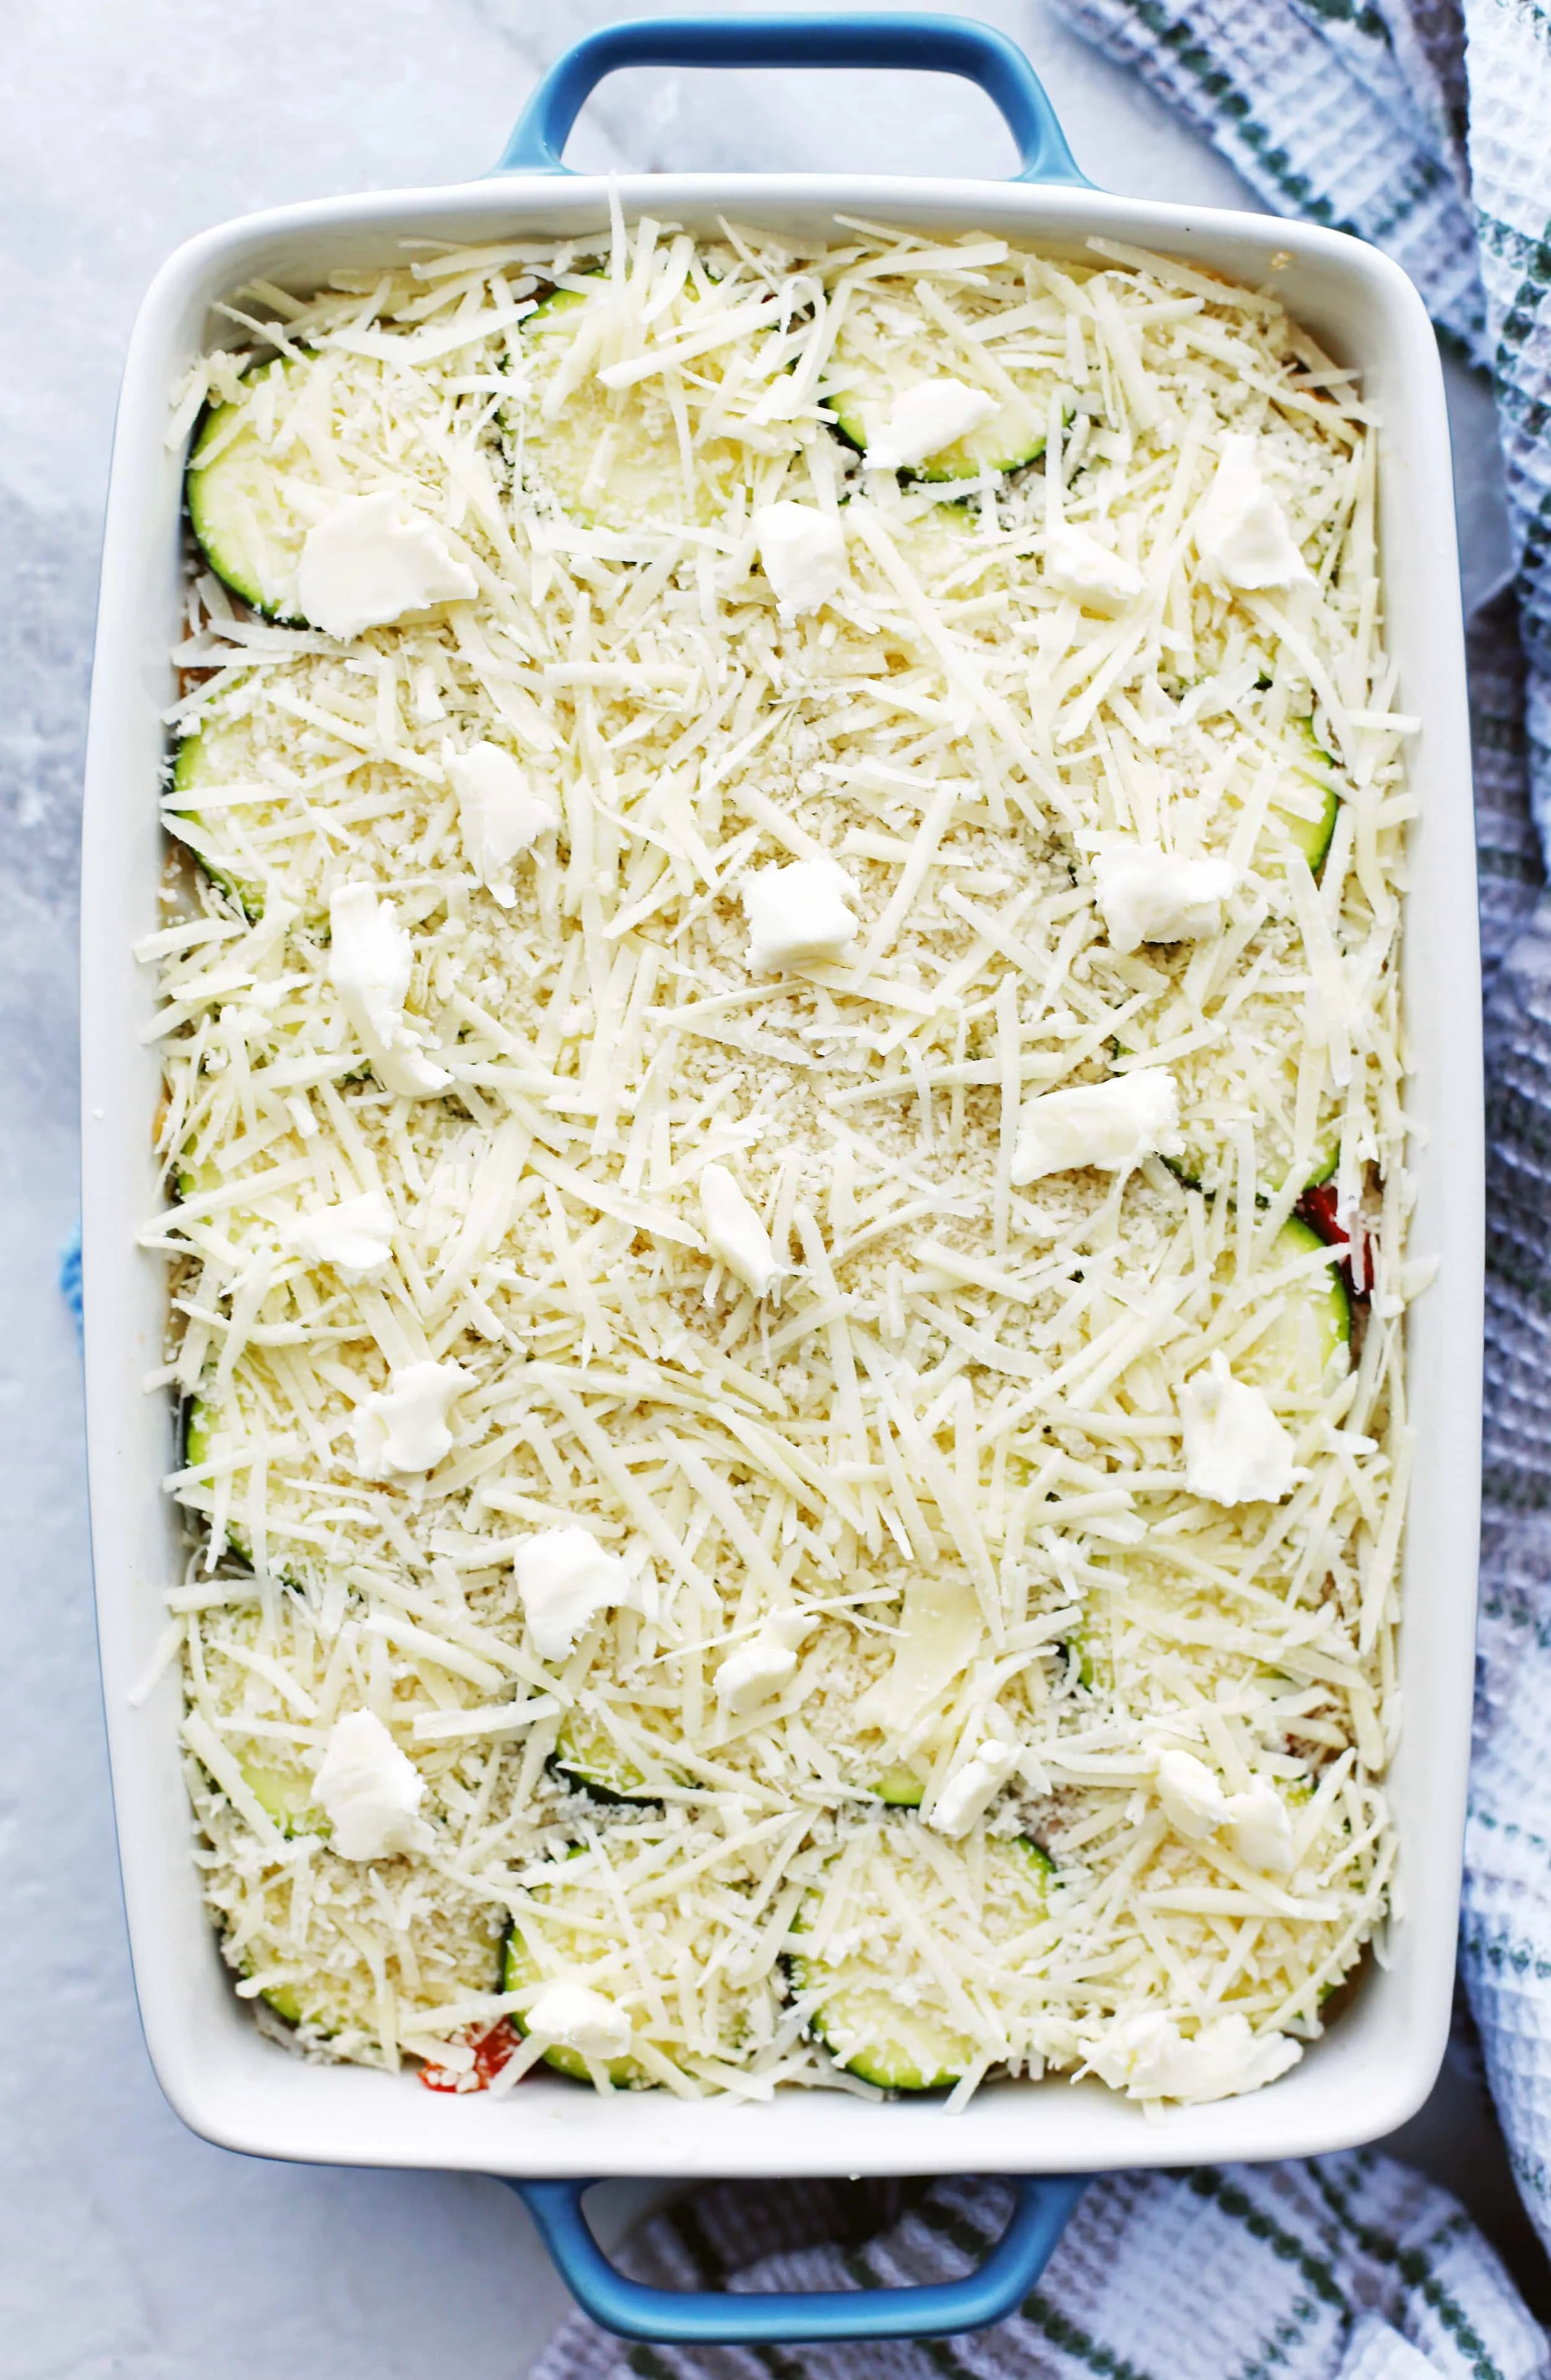 Unbaked Zucchini Gratin with Gruyère and Panko Breadcrumbs in a large rectangular casserole dish.